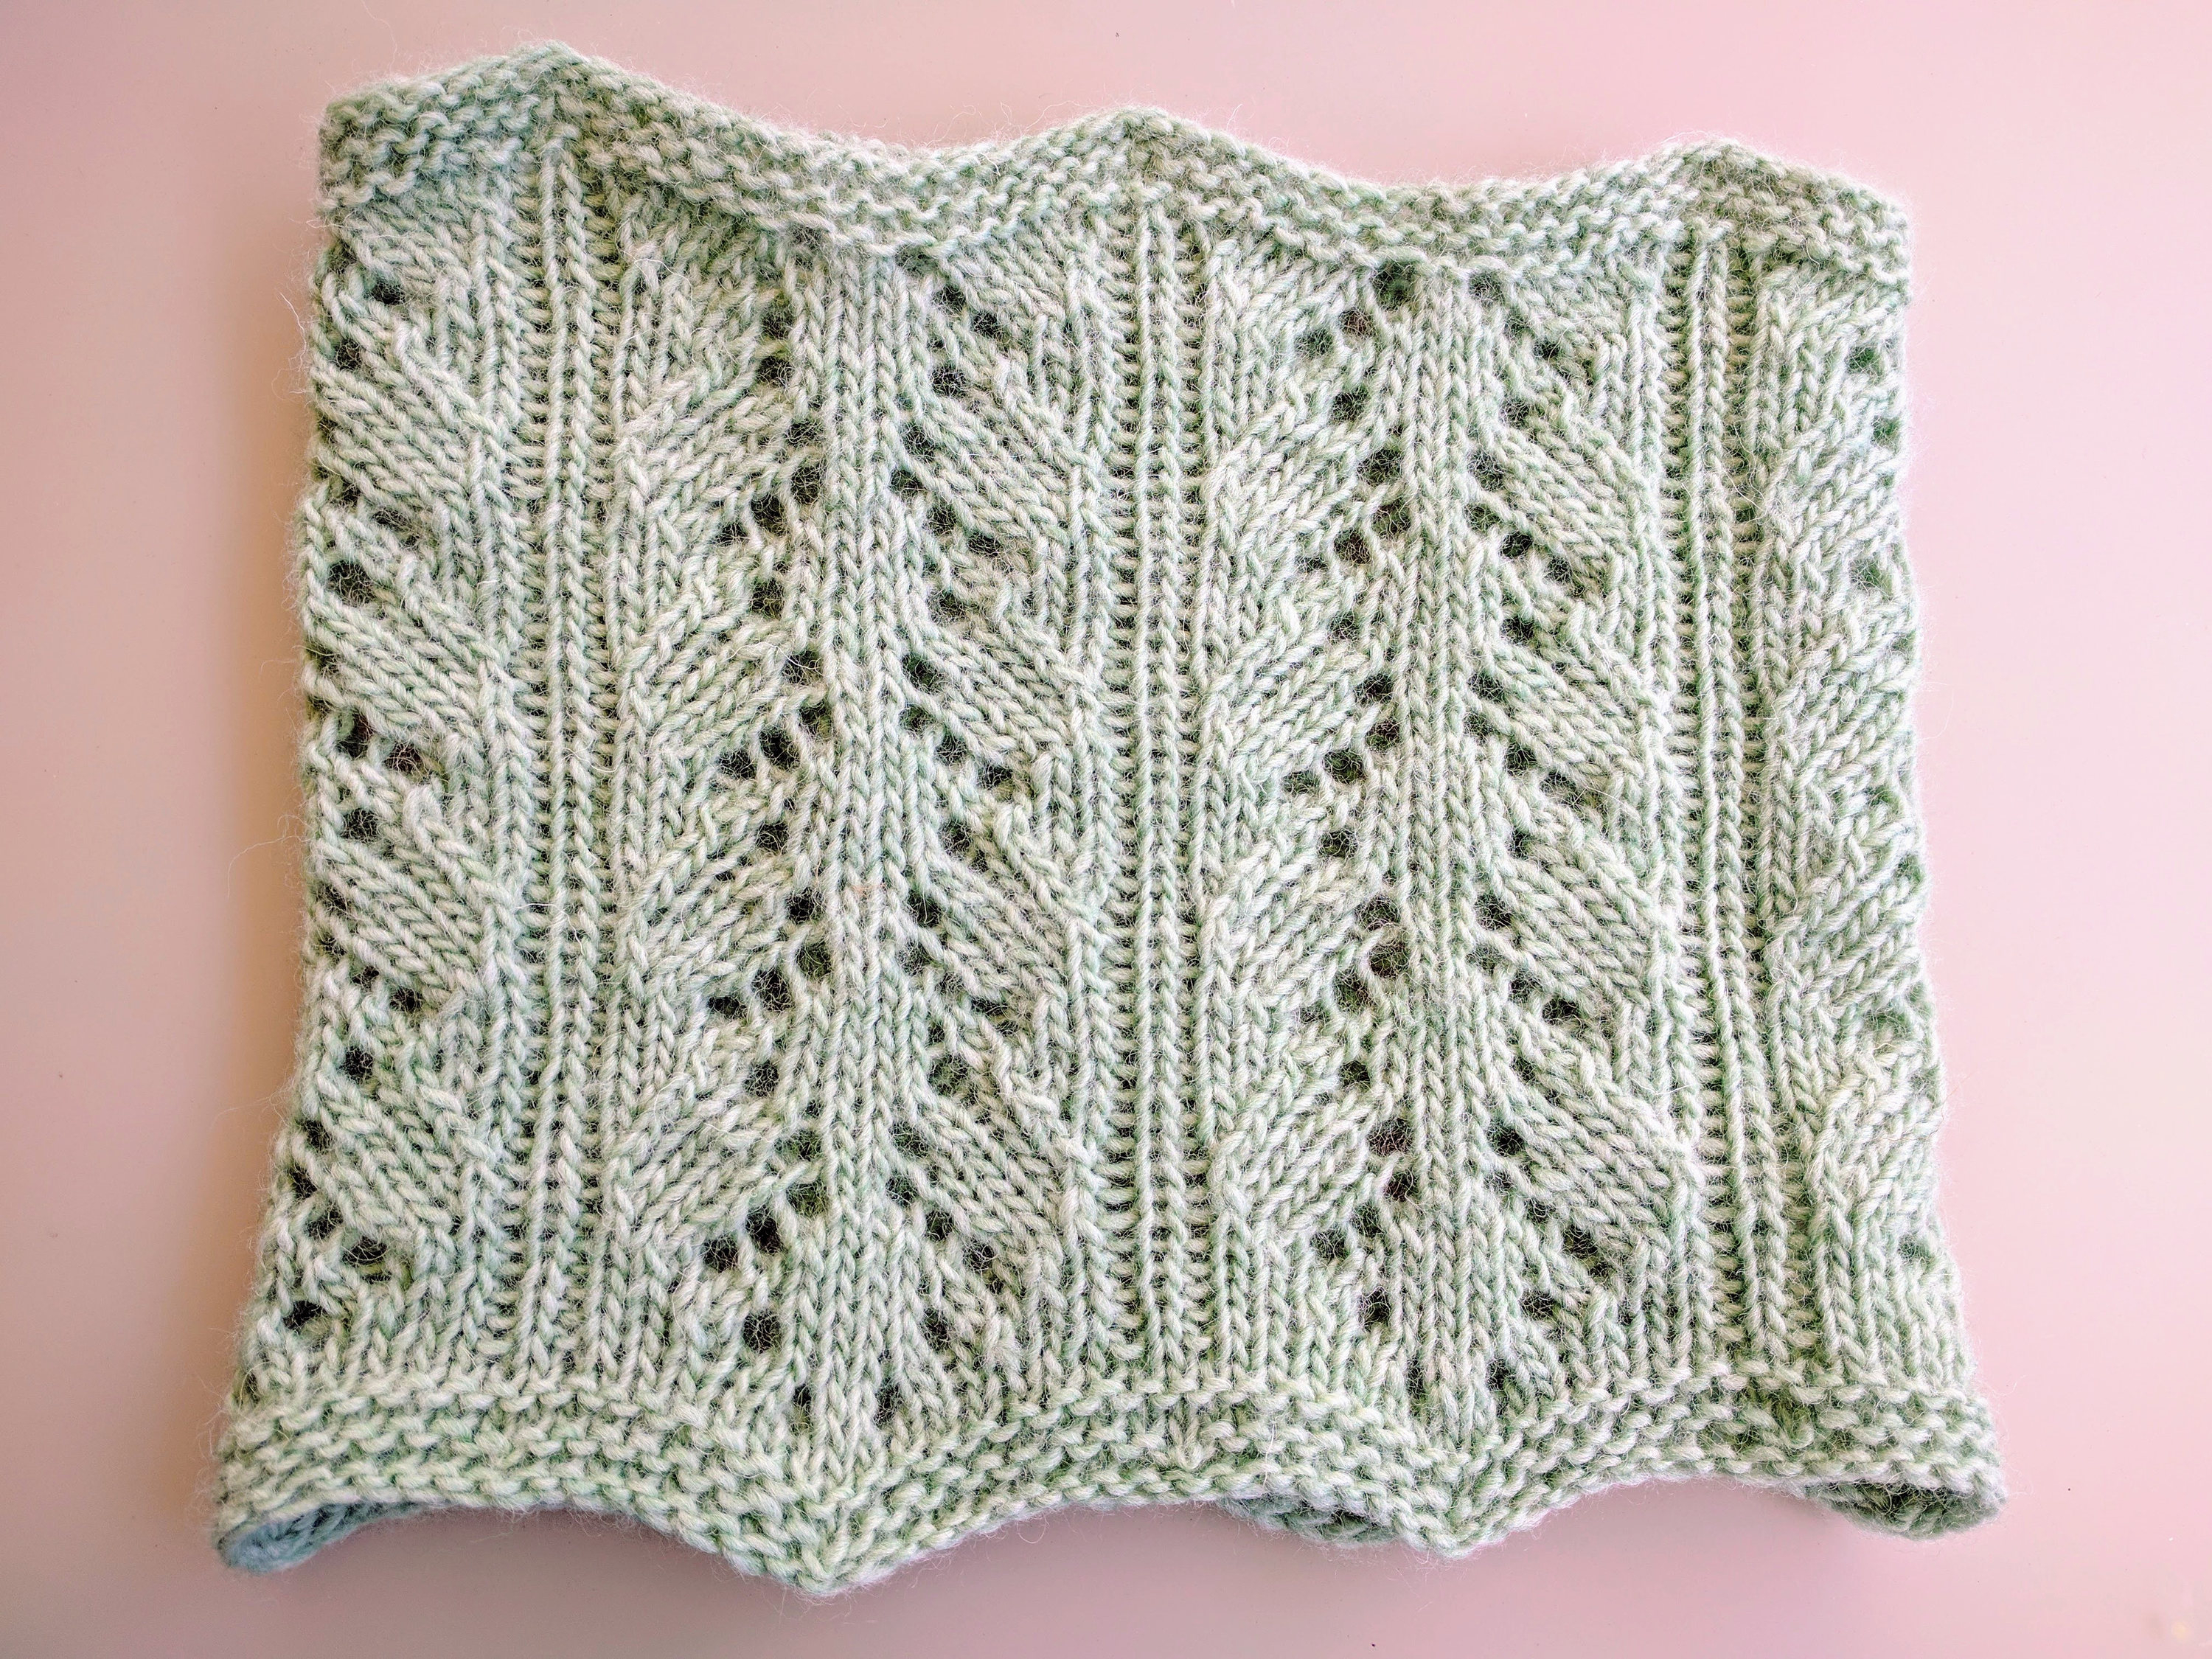 Knit Lace Cowl Pattern Knitted Lace Cowl Pattern Download Easy To Knit First Knitted Lace Project